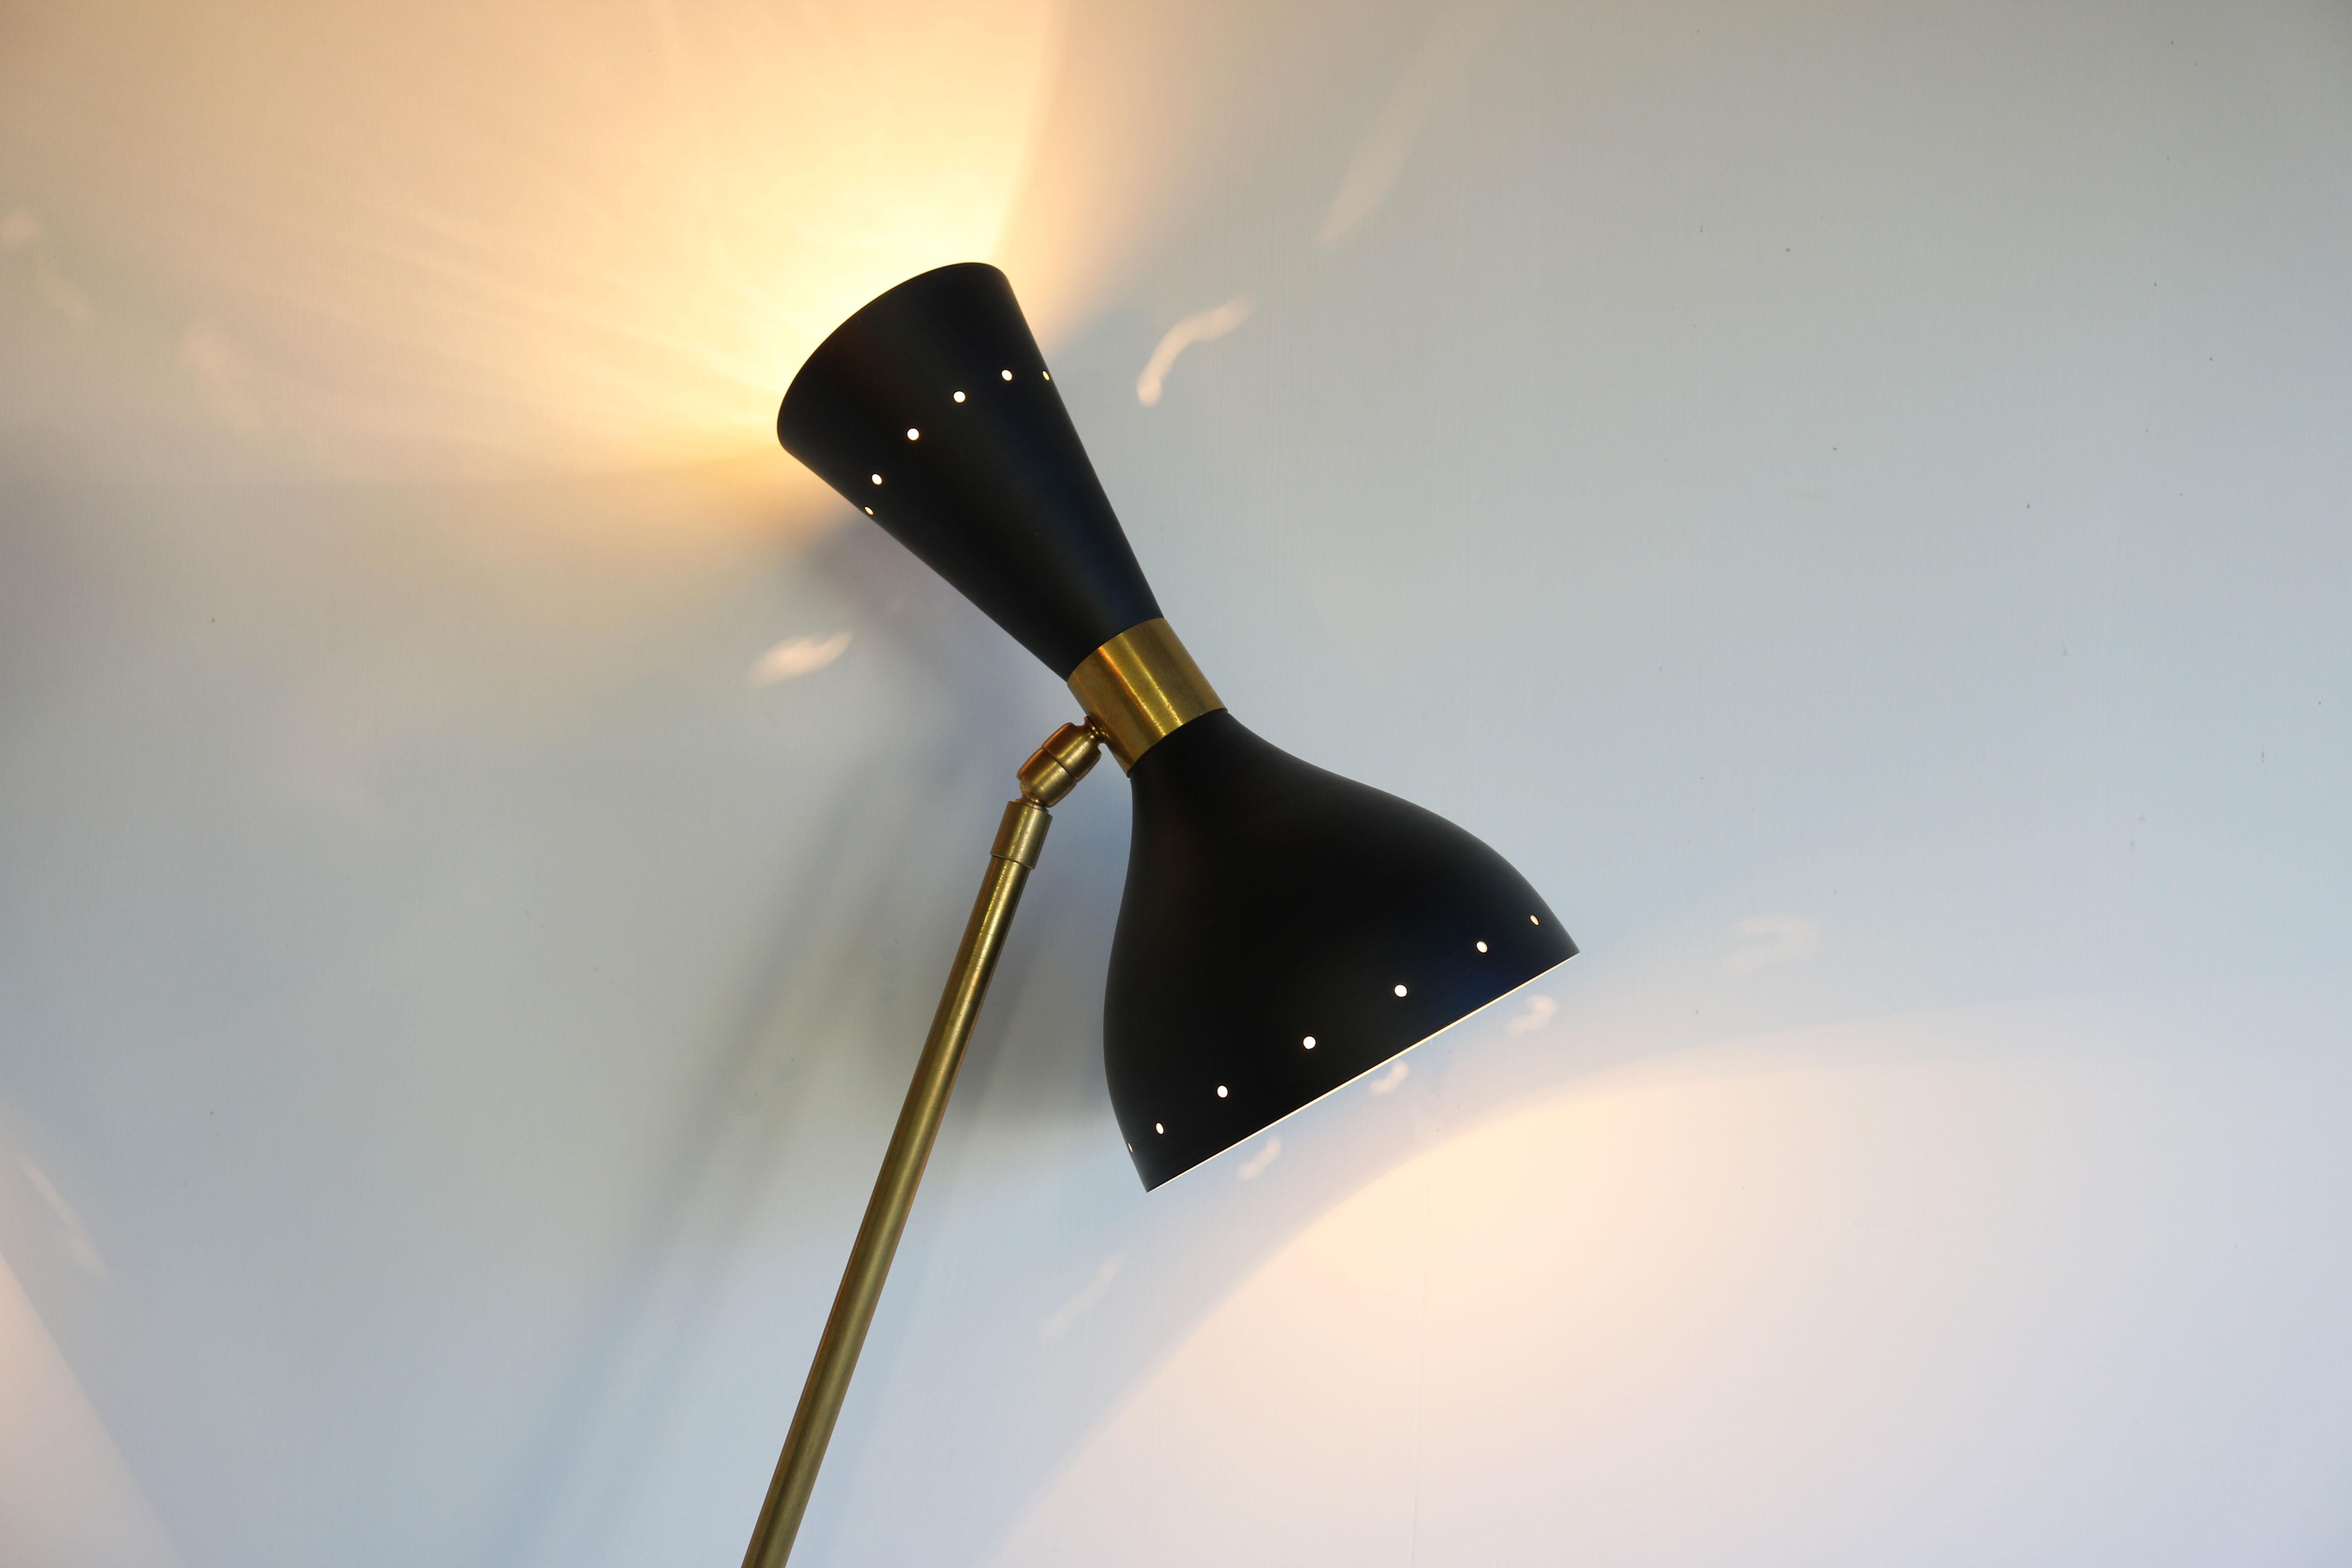 1 of 2 stylish minimalist Italian design floor lamps in the style of Stilnovo 1950. 
The shades can be adjusted to your desired angle. 
Each floor lamp has 6 light sockets, 3 facing down and 3 facing up. 
Rewired and ready for safe use. Slight